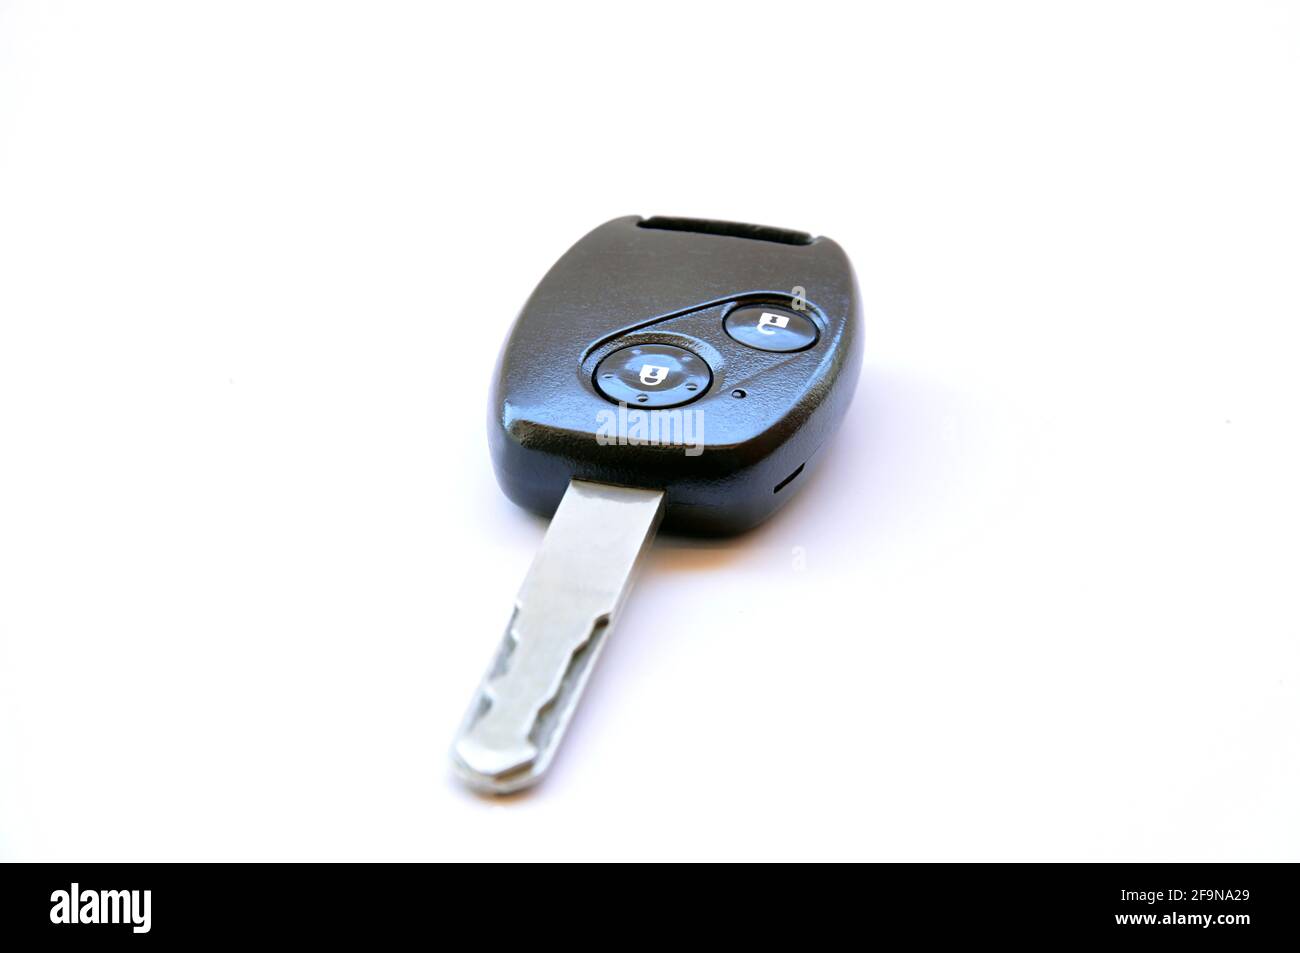 Remote control car key - isolated on white background Stock Photo